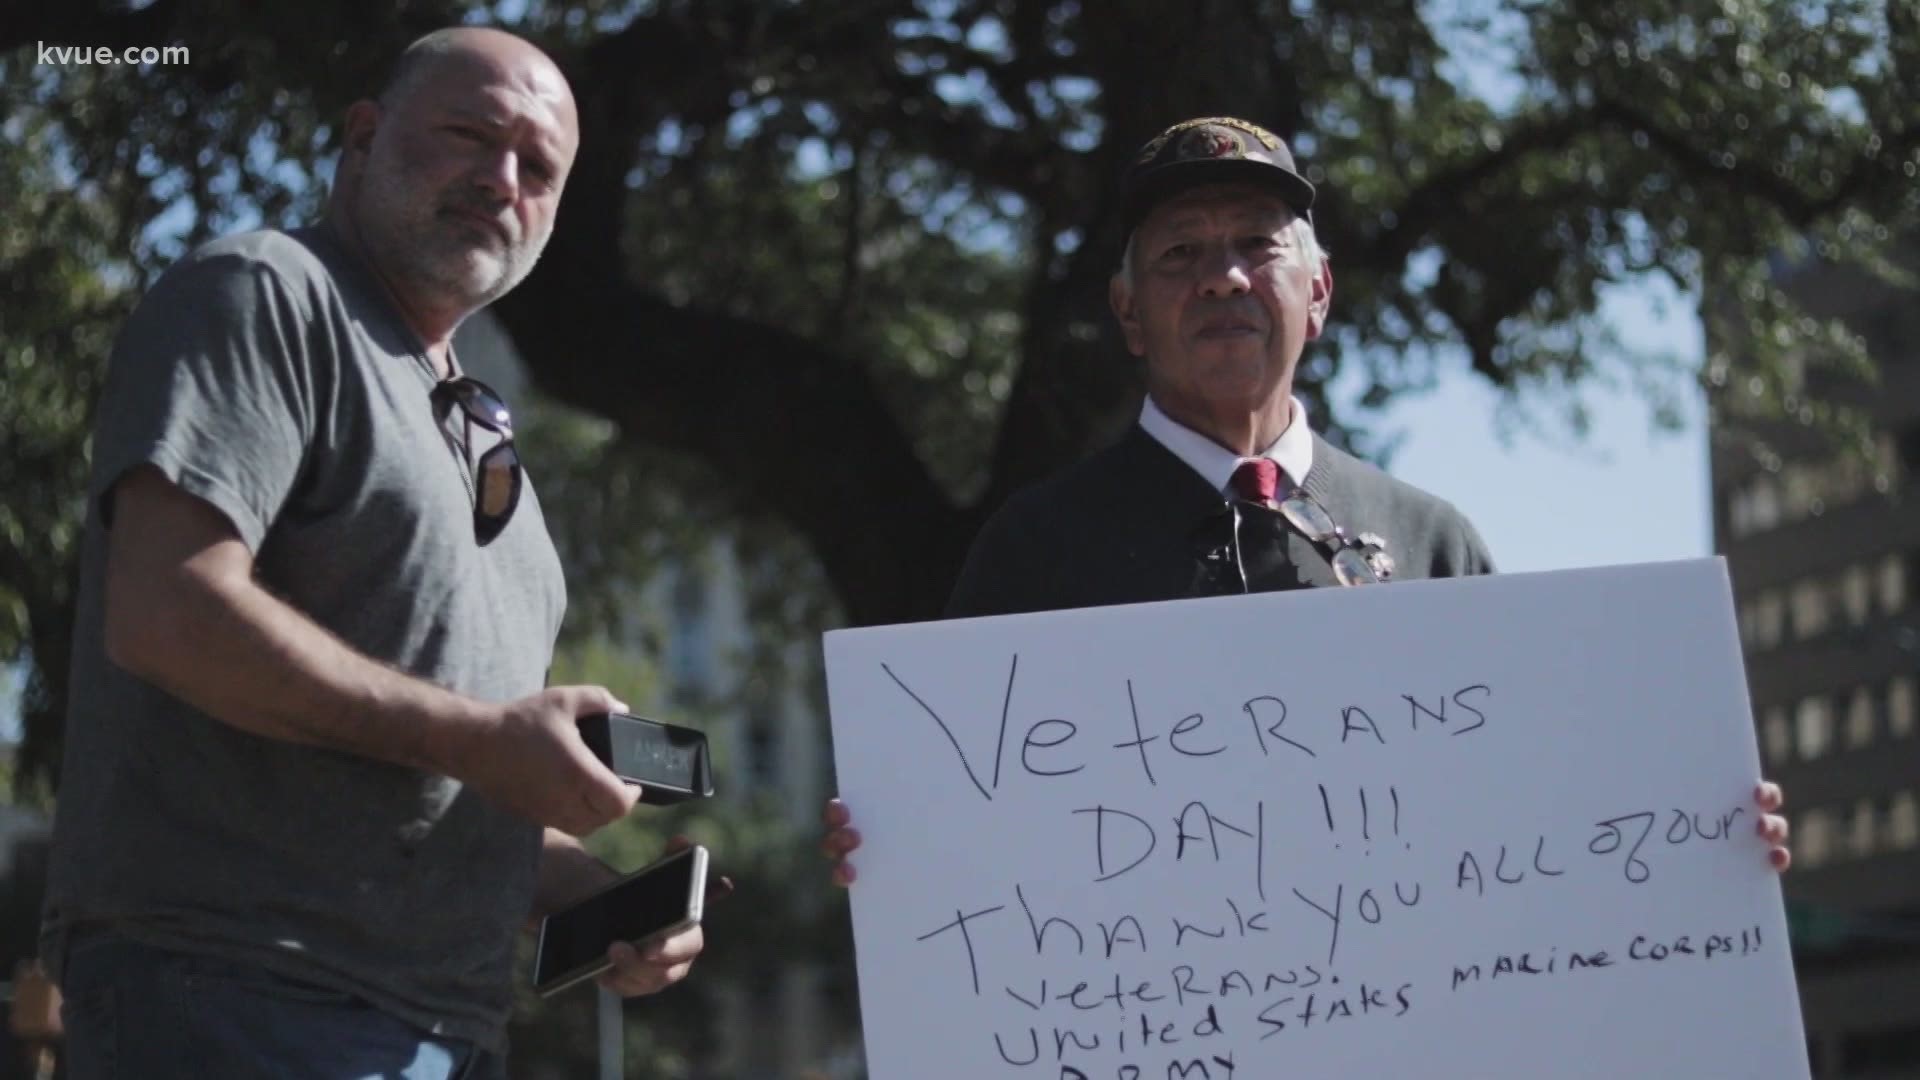 There was no special parade for veterans at the Texas Capitol this year. But Erica Proffer tells us some still wanted to make Veterans Day something extra.